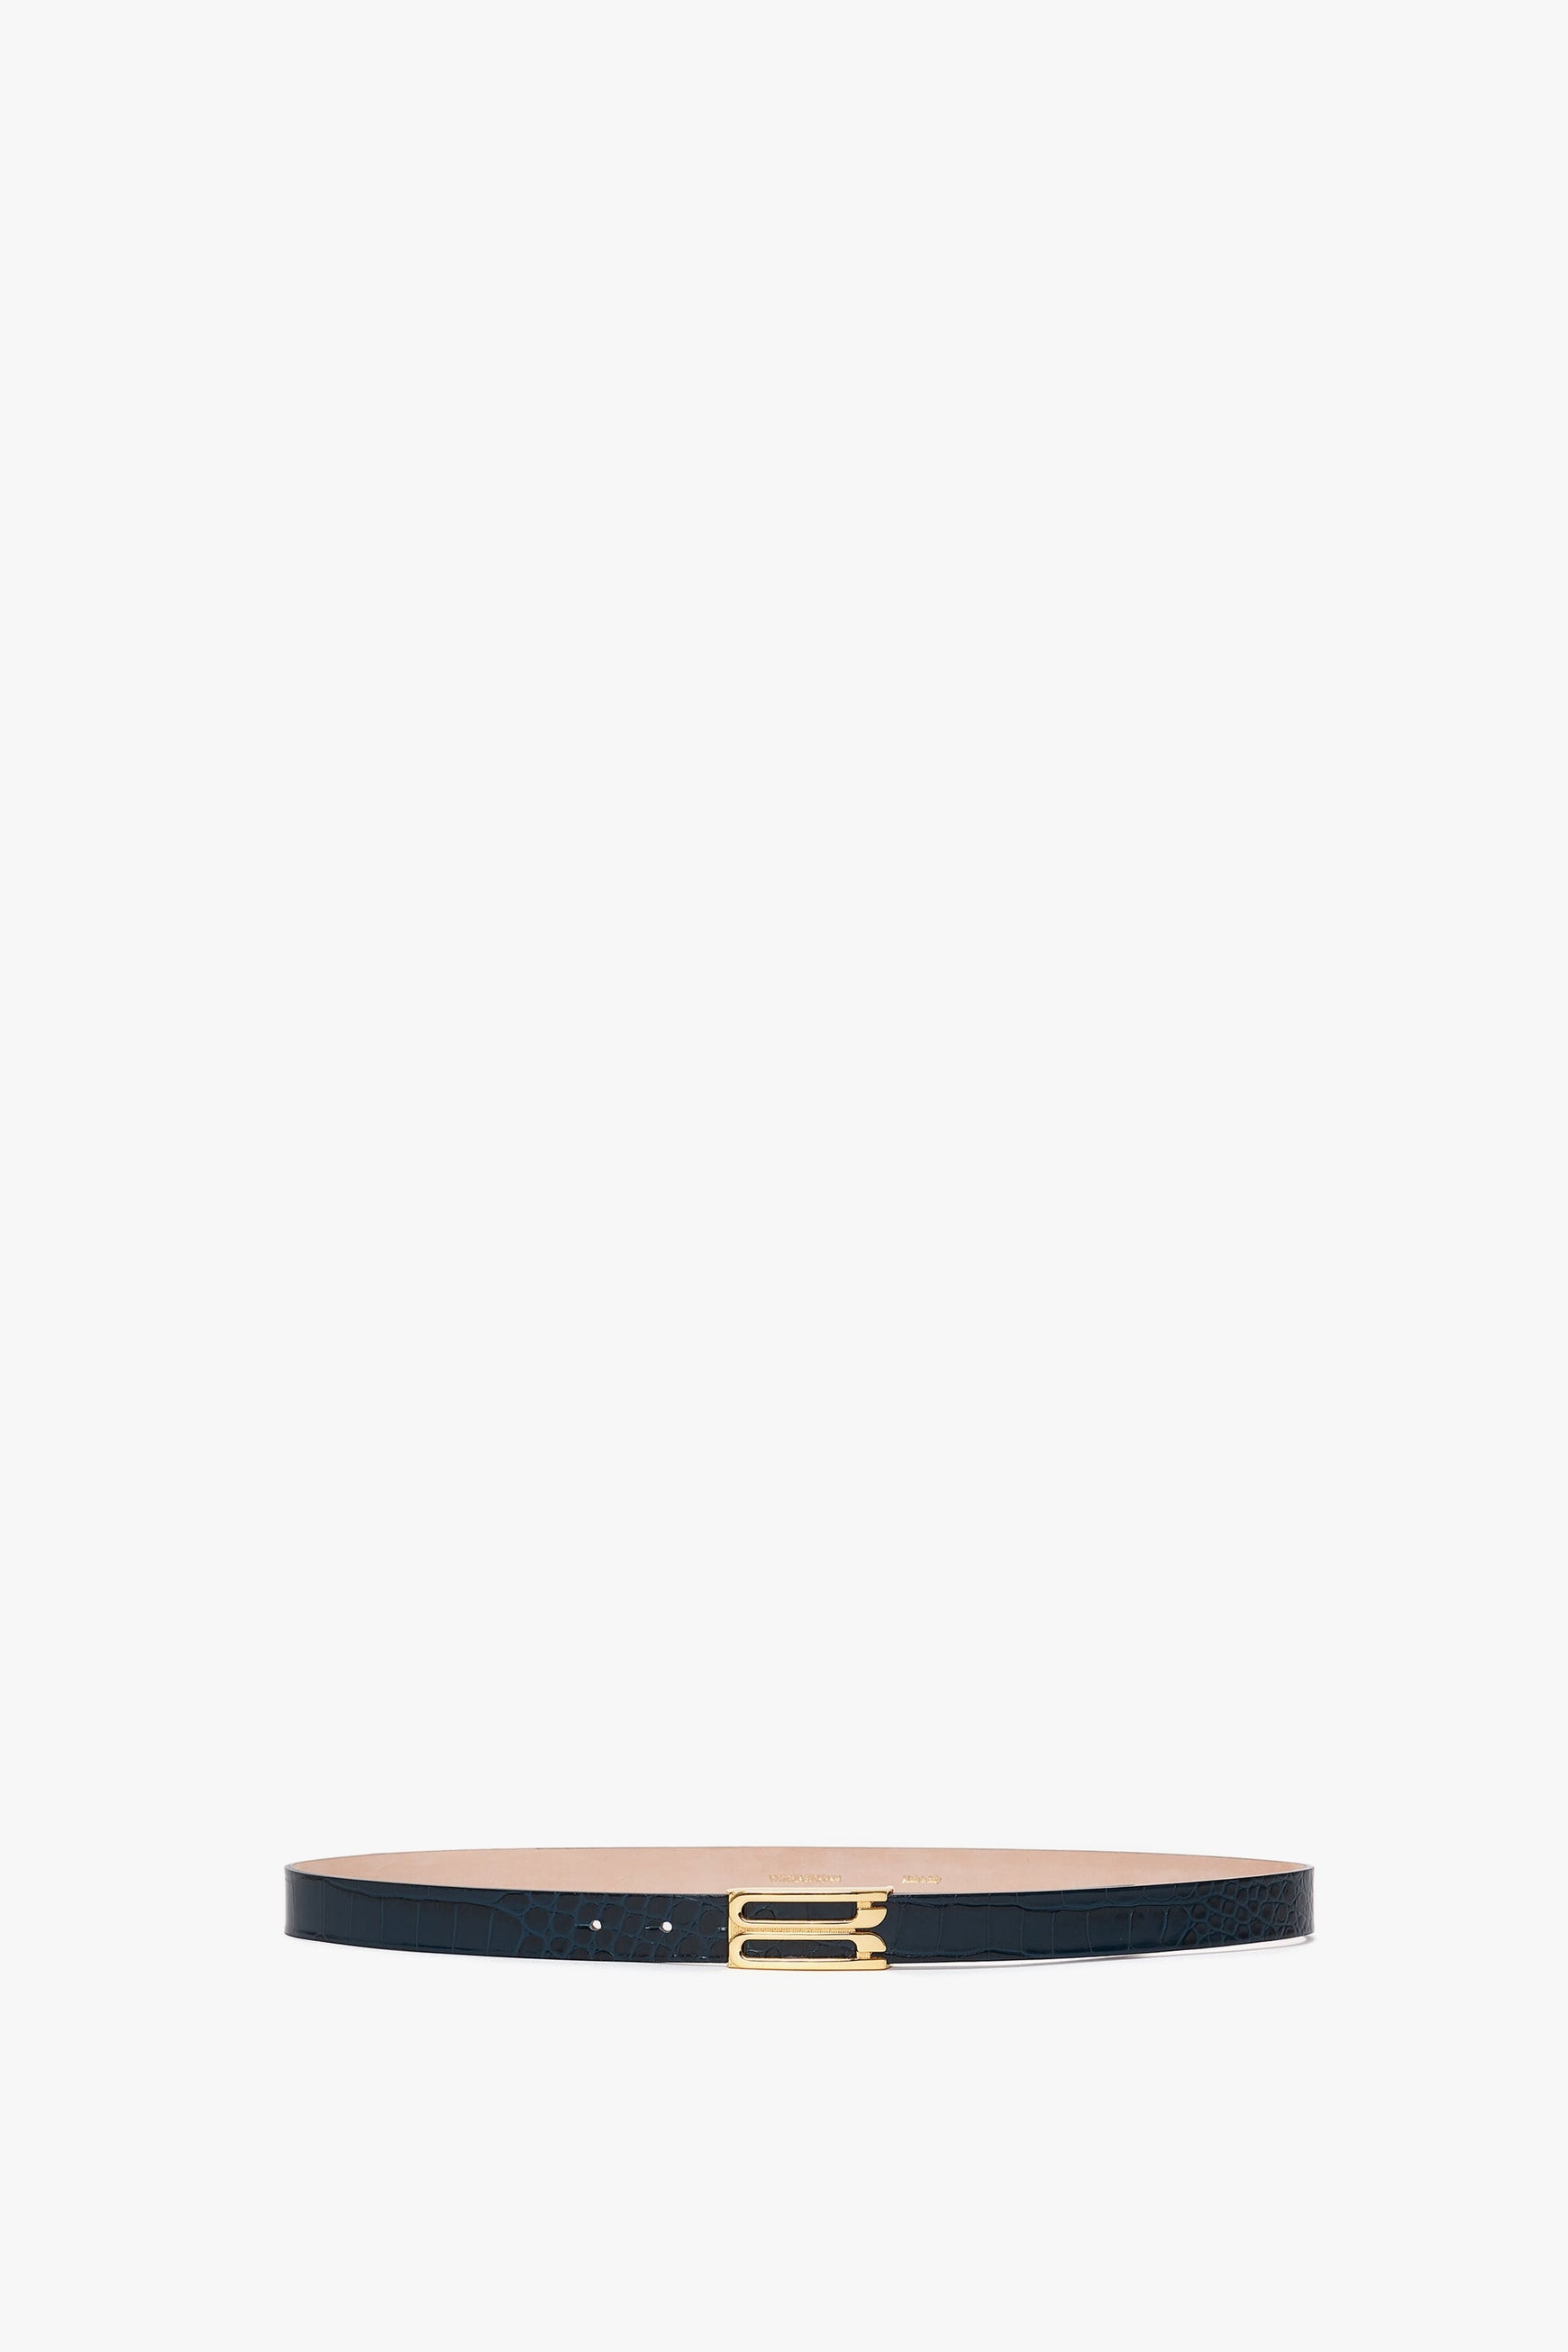 A slim, midnight blue belt crafted from croc-embossed calf leather, featuring a striking gold buckle, displayed against a white background has been replaced with the **Frame Belt In Midnight Blue Croc Embossed Calf Leather by Victoria Beckham**.